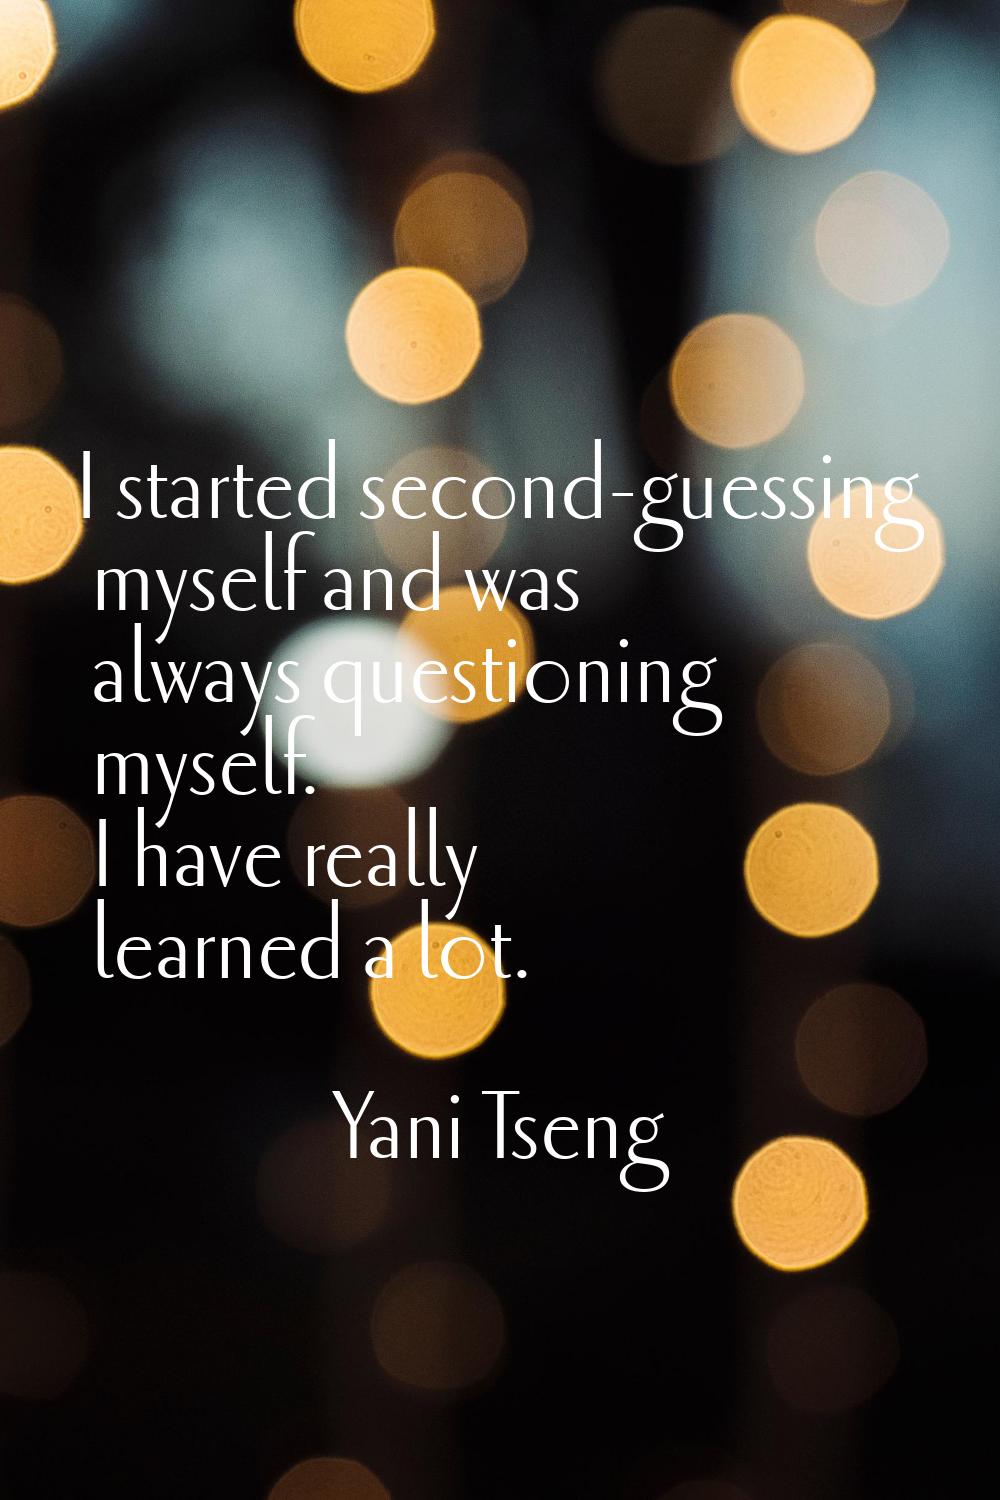 I started second-guessing myself and was always questioning myself. I have really learned a lot.